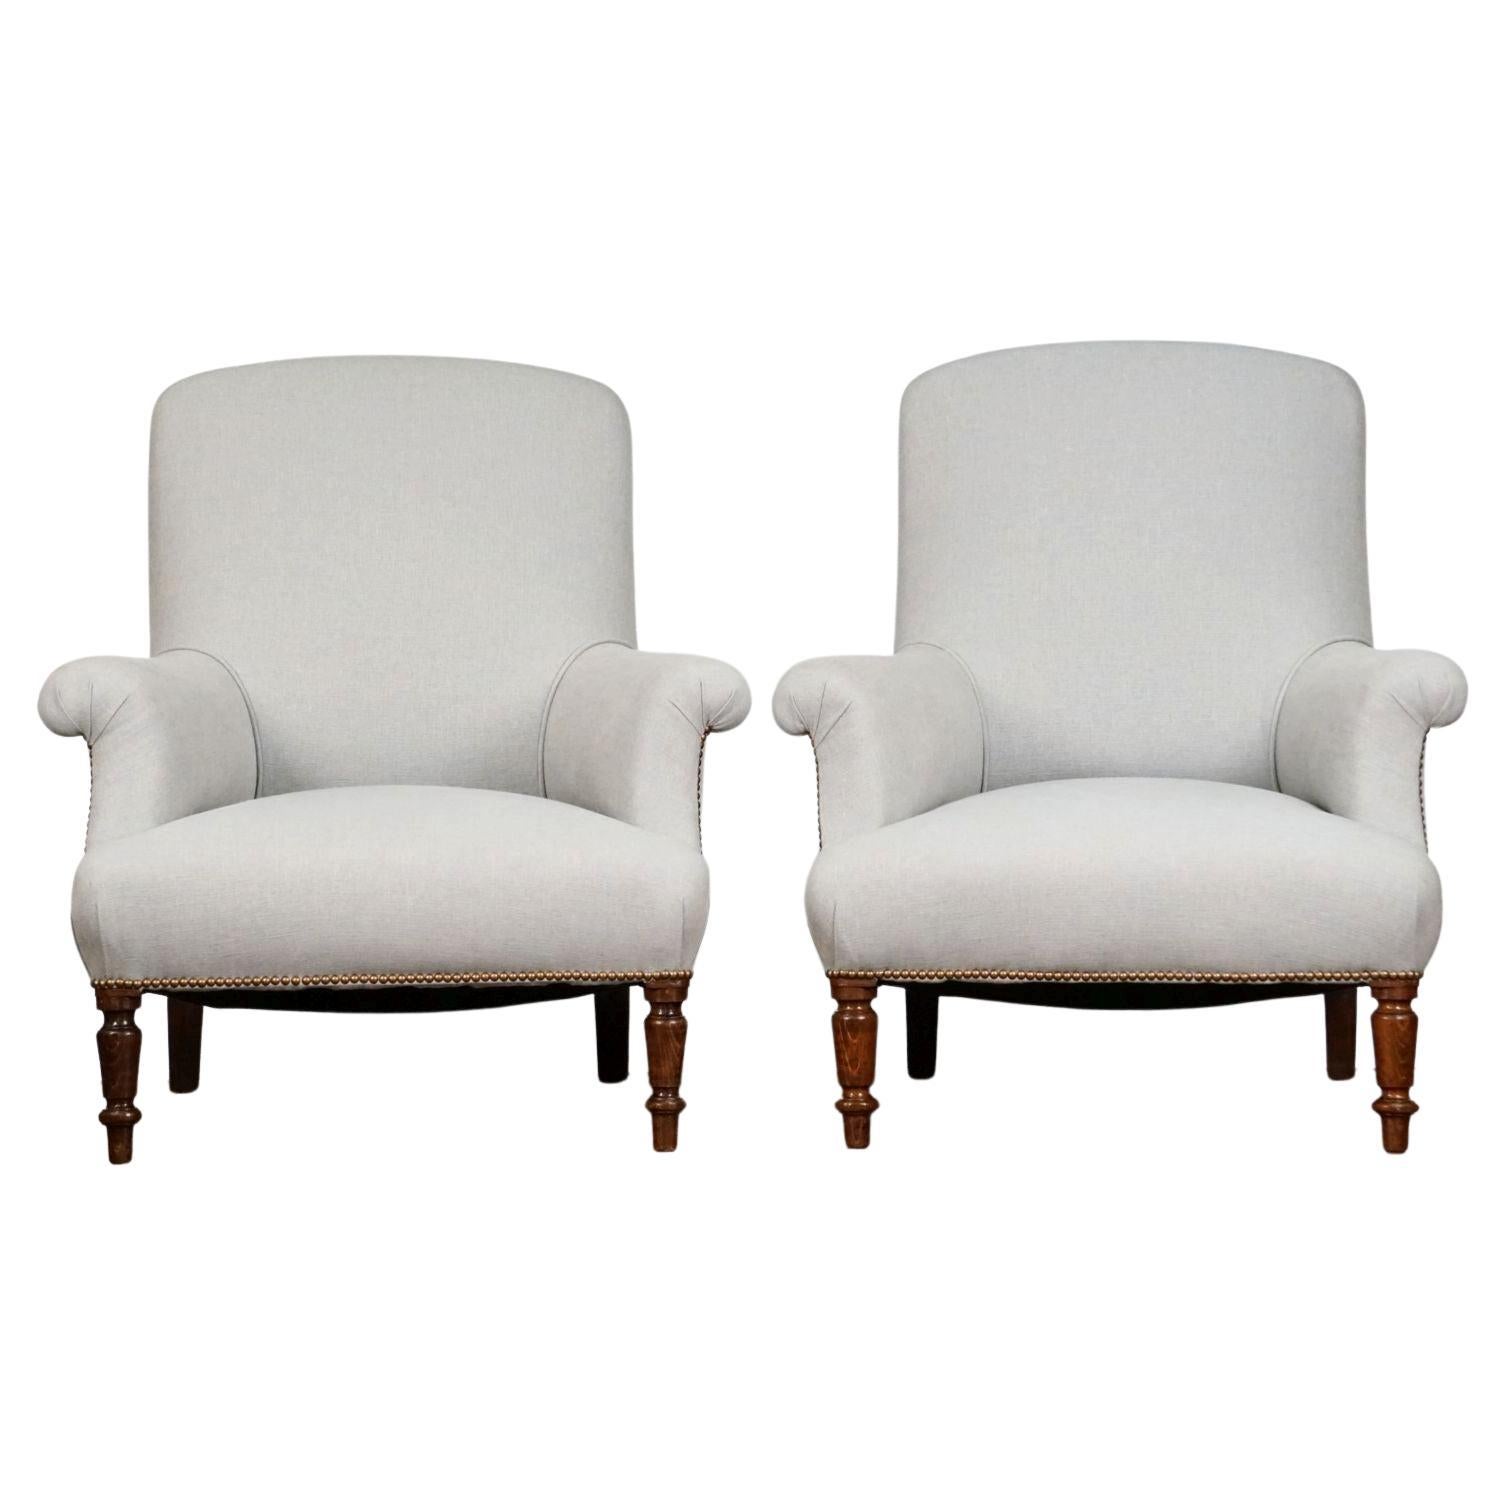 A fine pair of comfortable French upholstered armchairs, c.1880, completely refurbished and re-upholstered in a subtle grey pure linen fabric - in elegant contrast to the rich turned legs of brown walnut. Piped and trimmed with antiqued brass studs